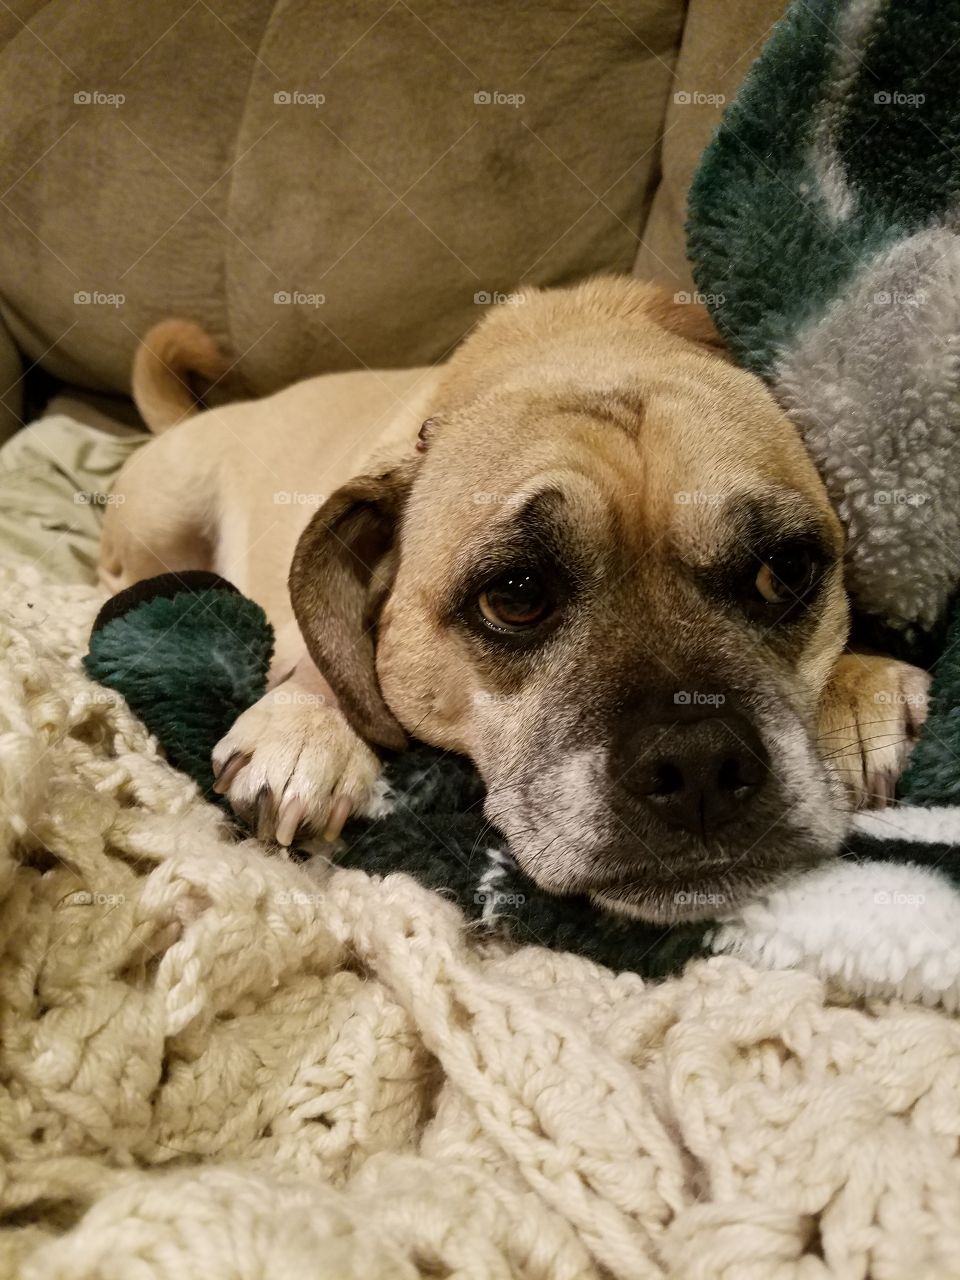 Puggle cuddling a blanket on the couch